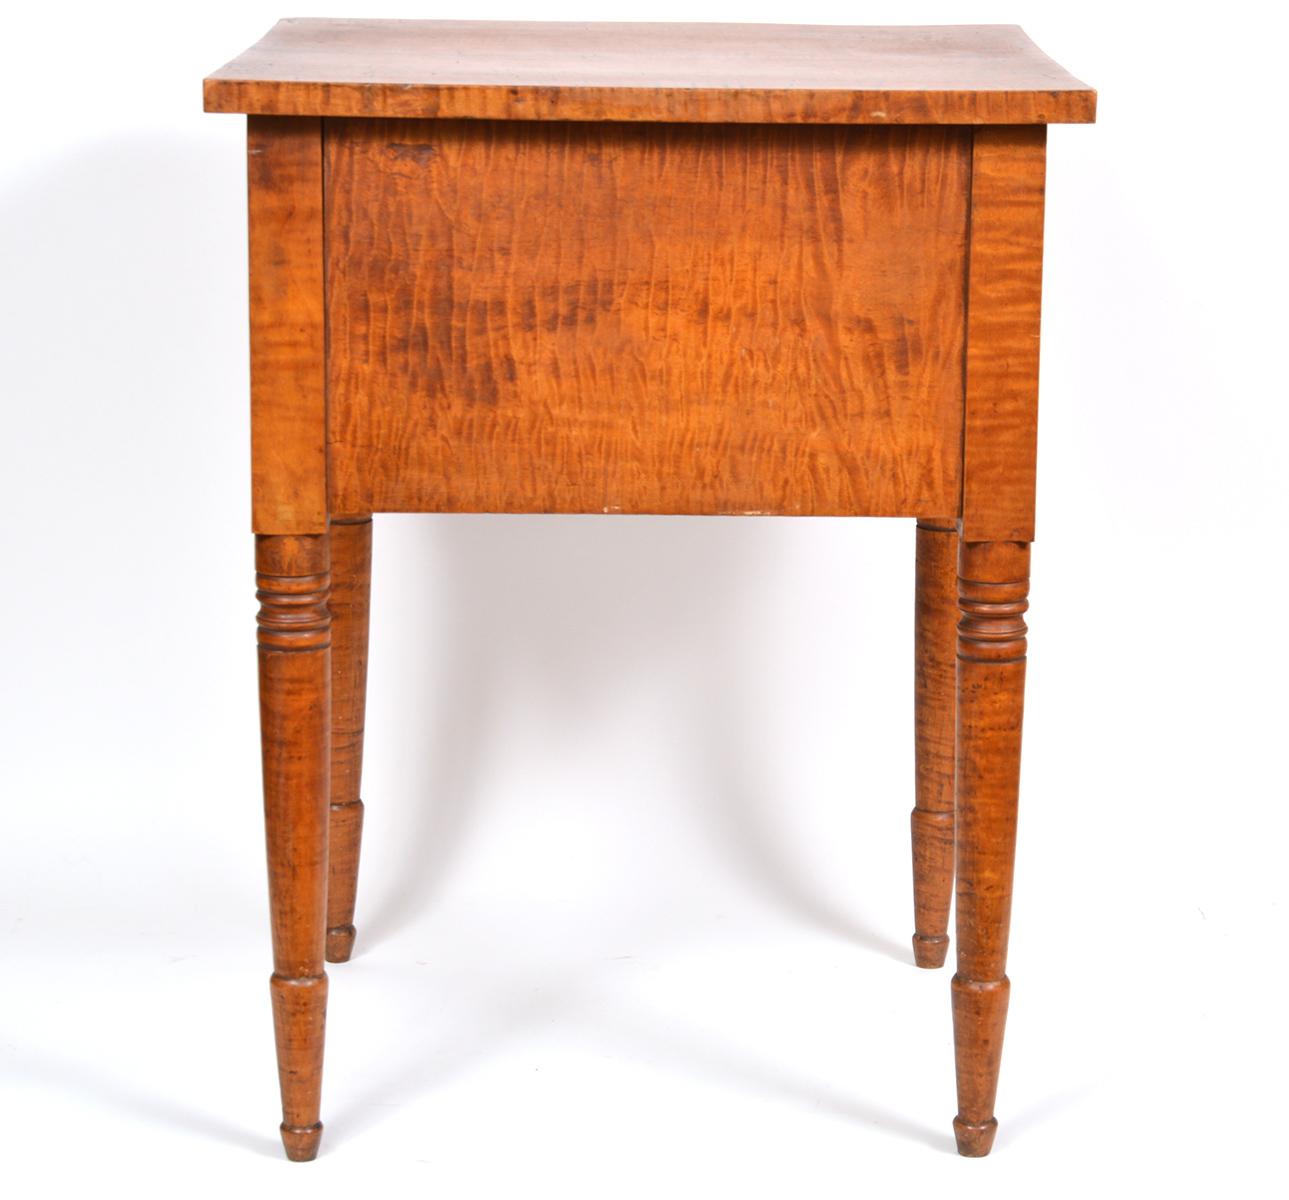 Early American Federal Two-Drawer Tiger Maple Work Table or Stand 2